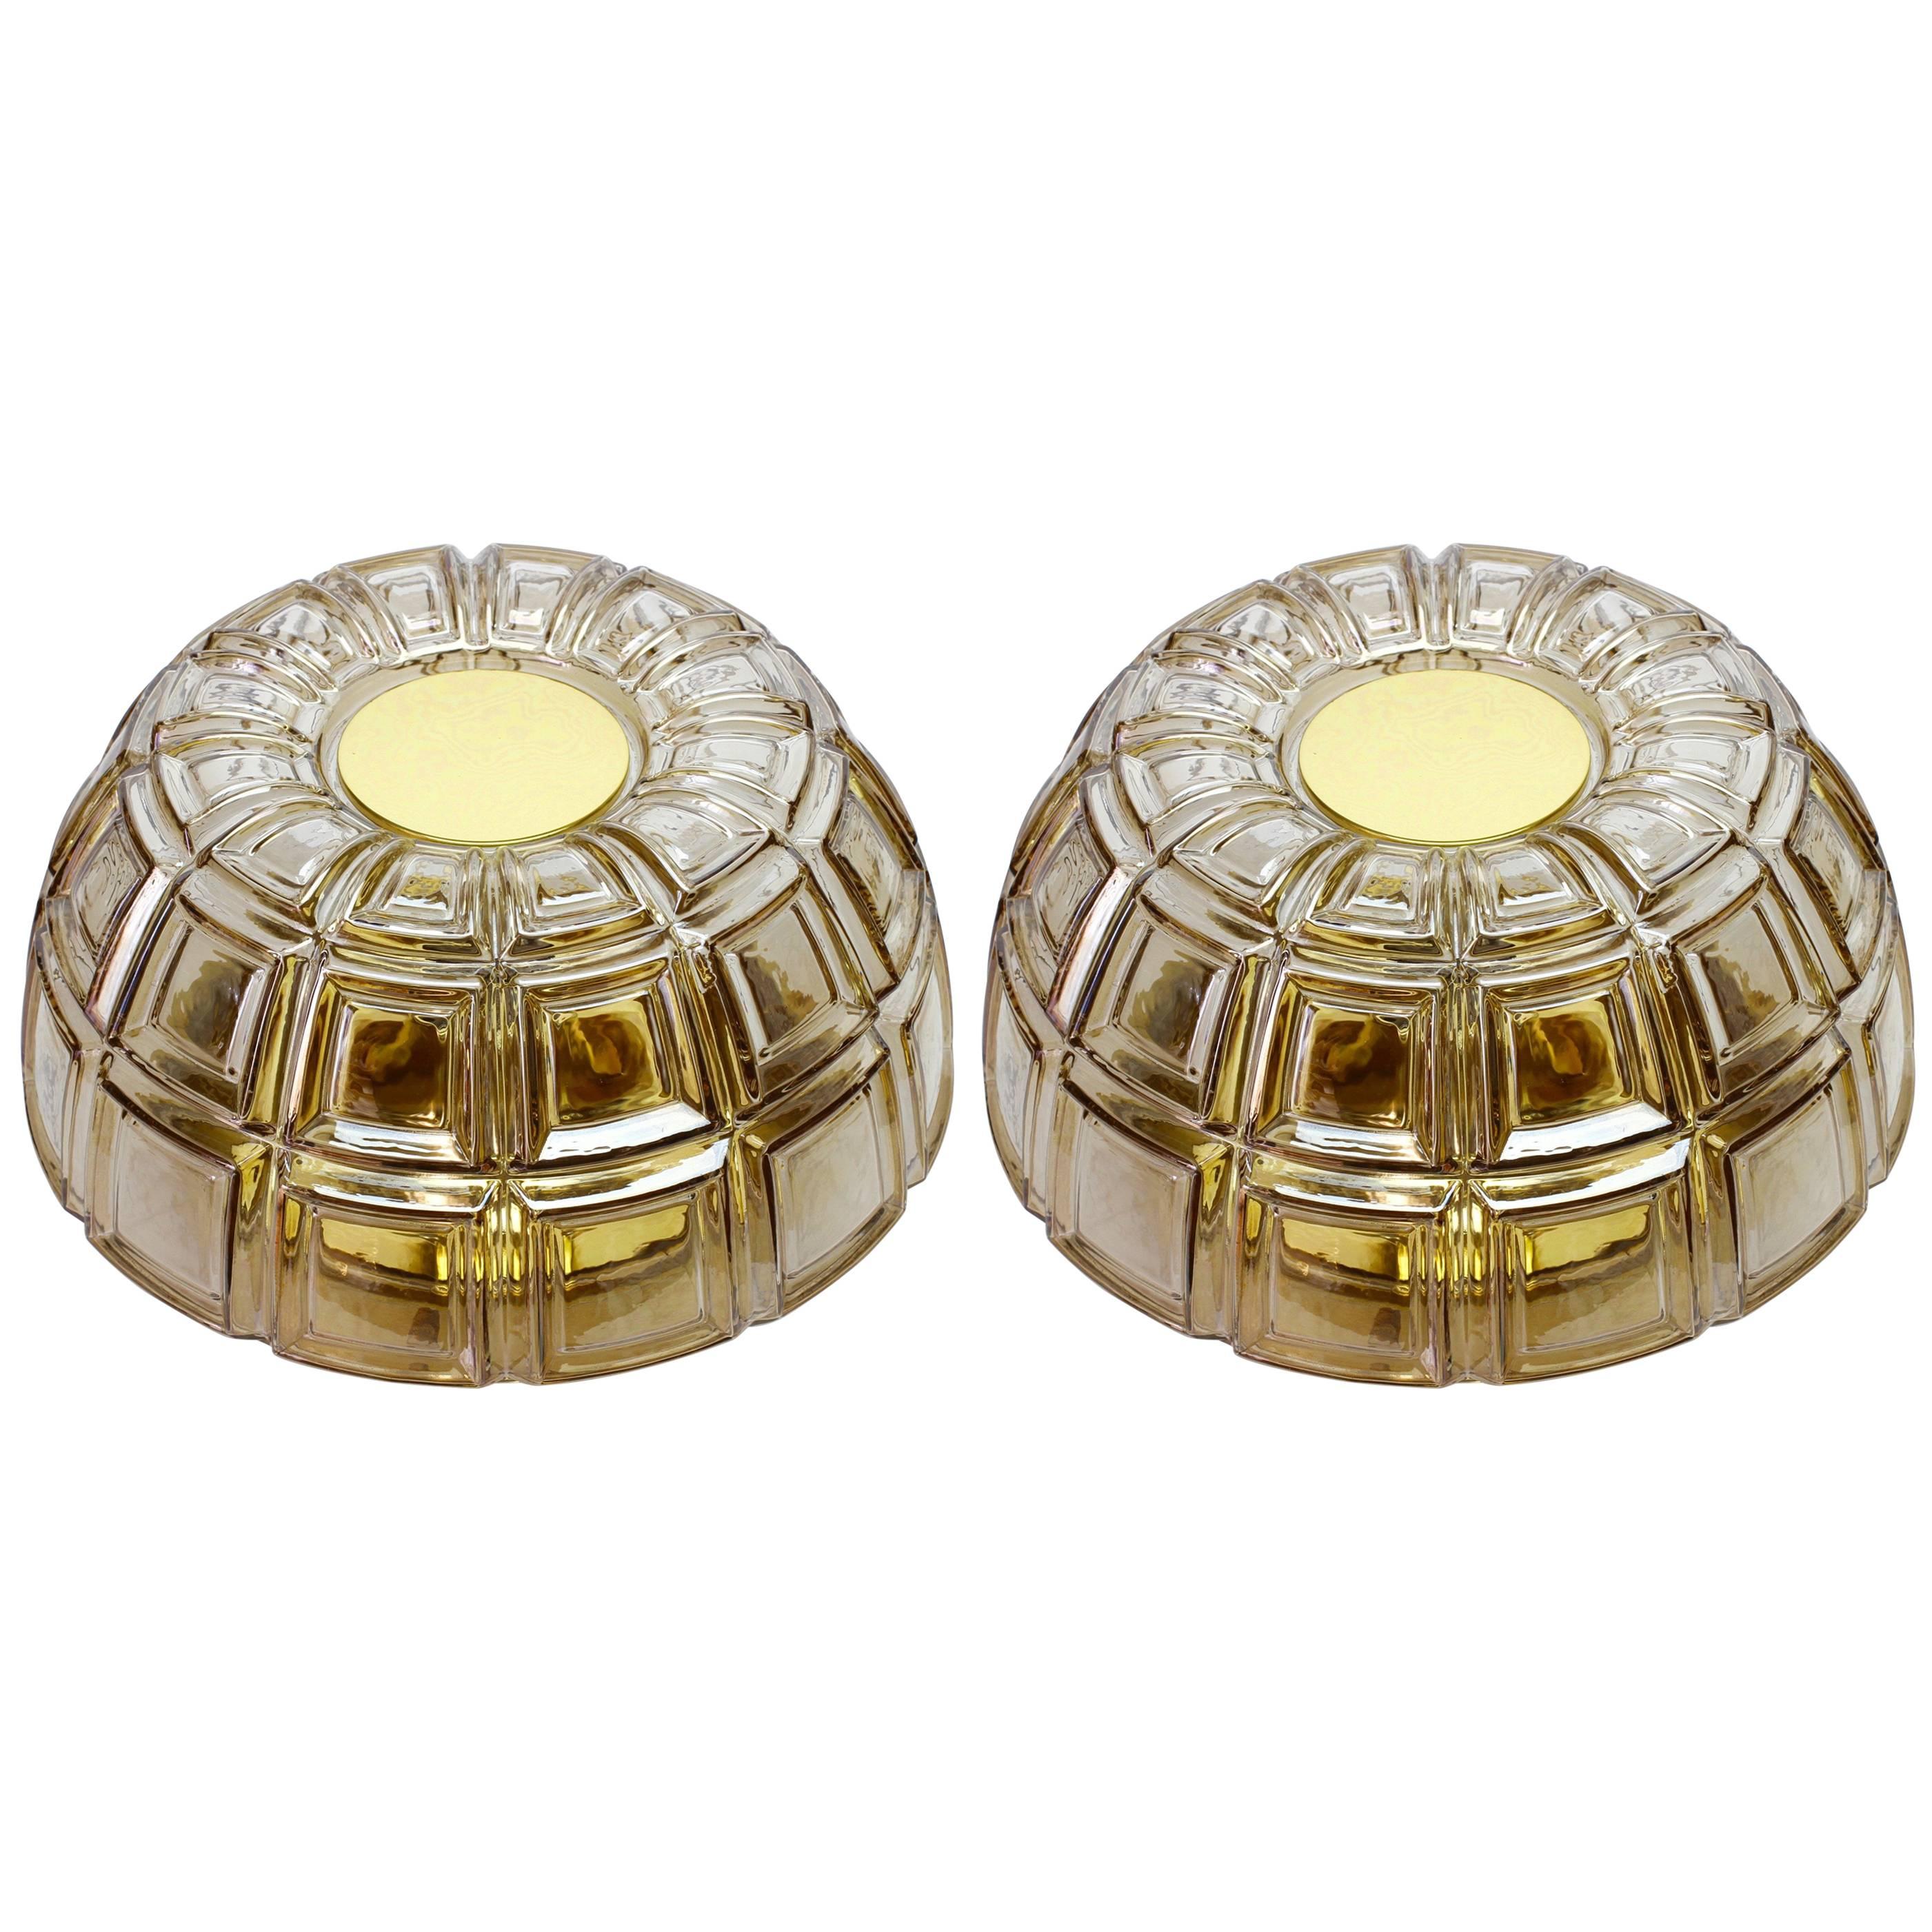 Pair of Topaz Toned Textured Glass Flush Mount Wall Lights or Sconces by Limburg